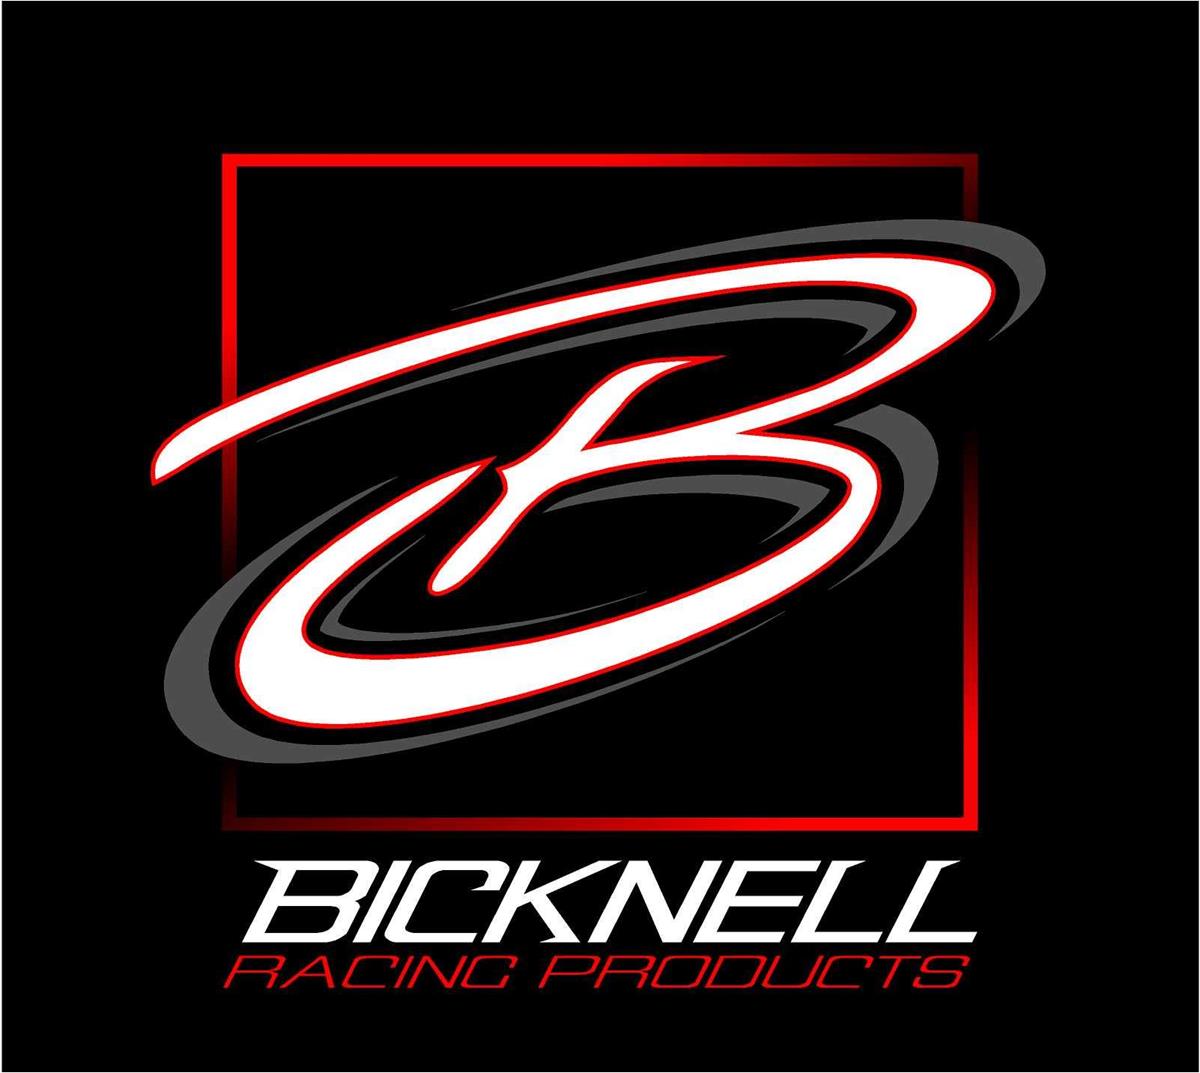 Bicknell Racing Products Again a Major Player at The Fulton Speedway Outlaw 200 Weekend Friday and Saturday October 1-2; Tickets and Weekend Schedule